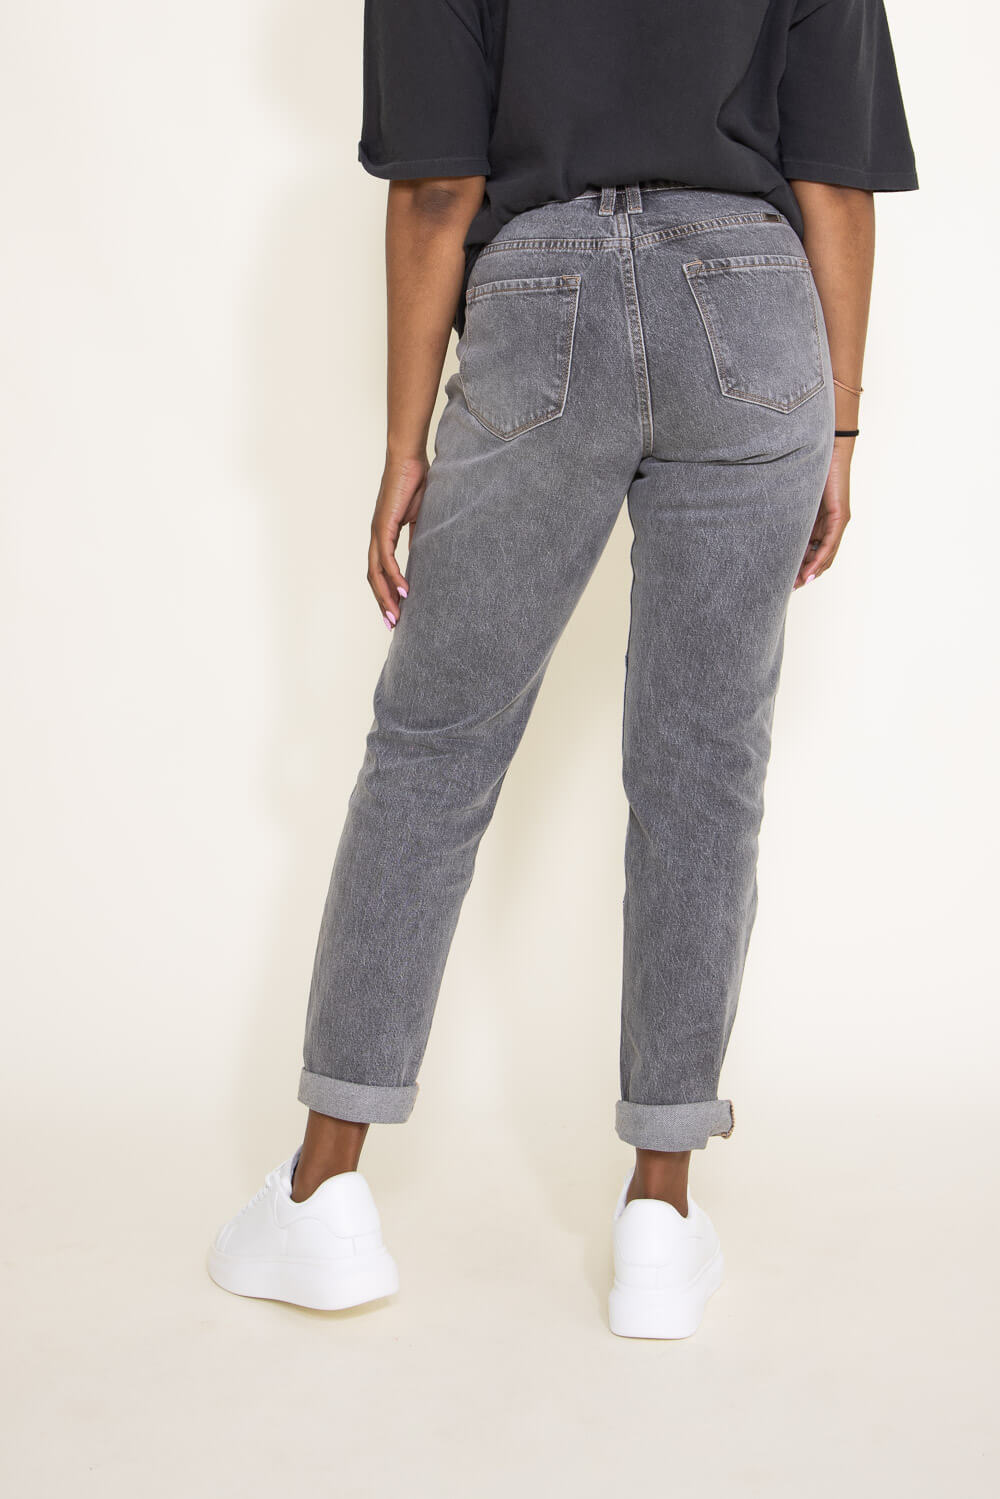 Levi's Grey Straight Fit High Rise Jeans